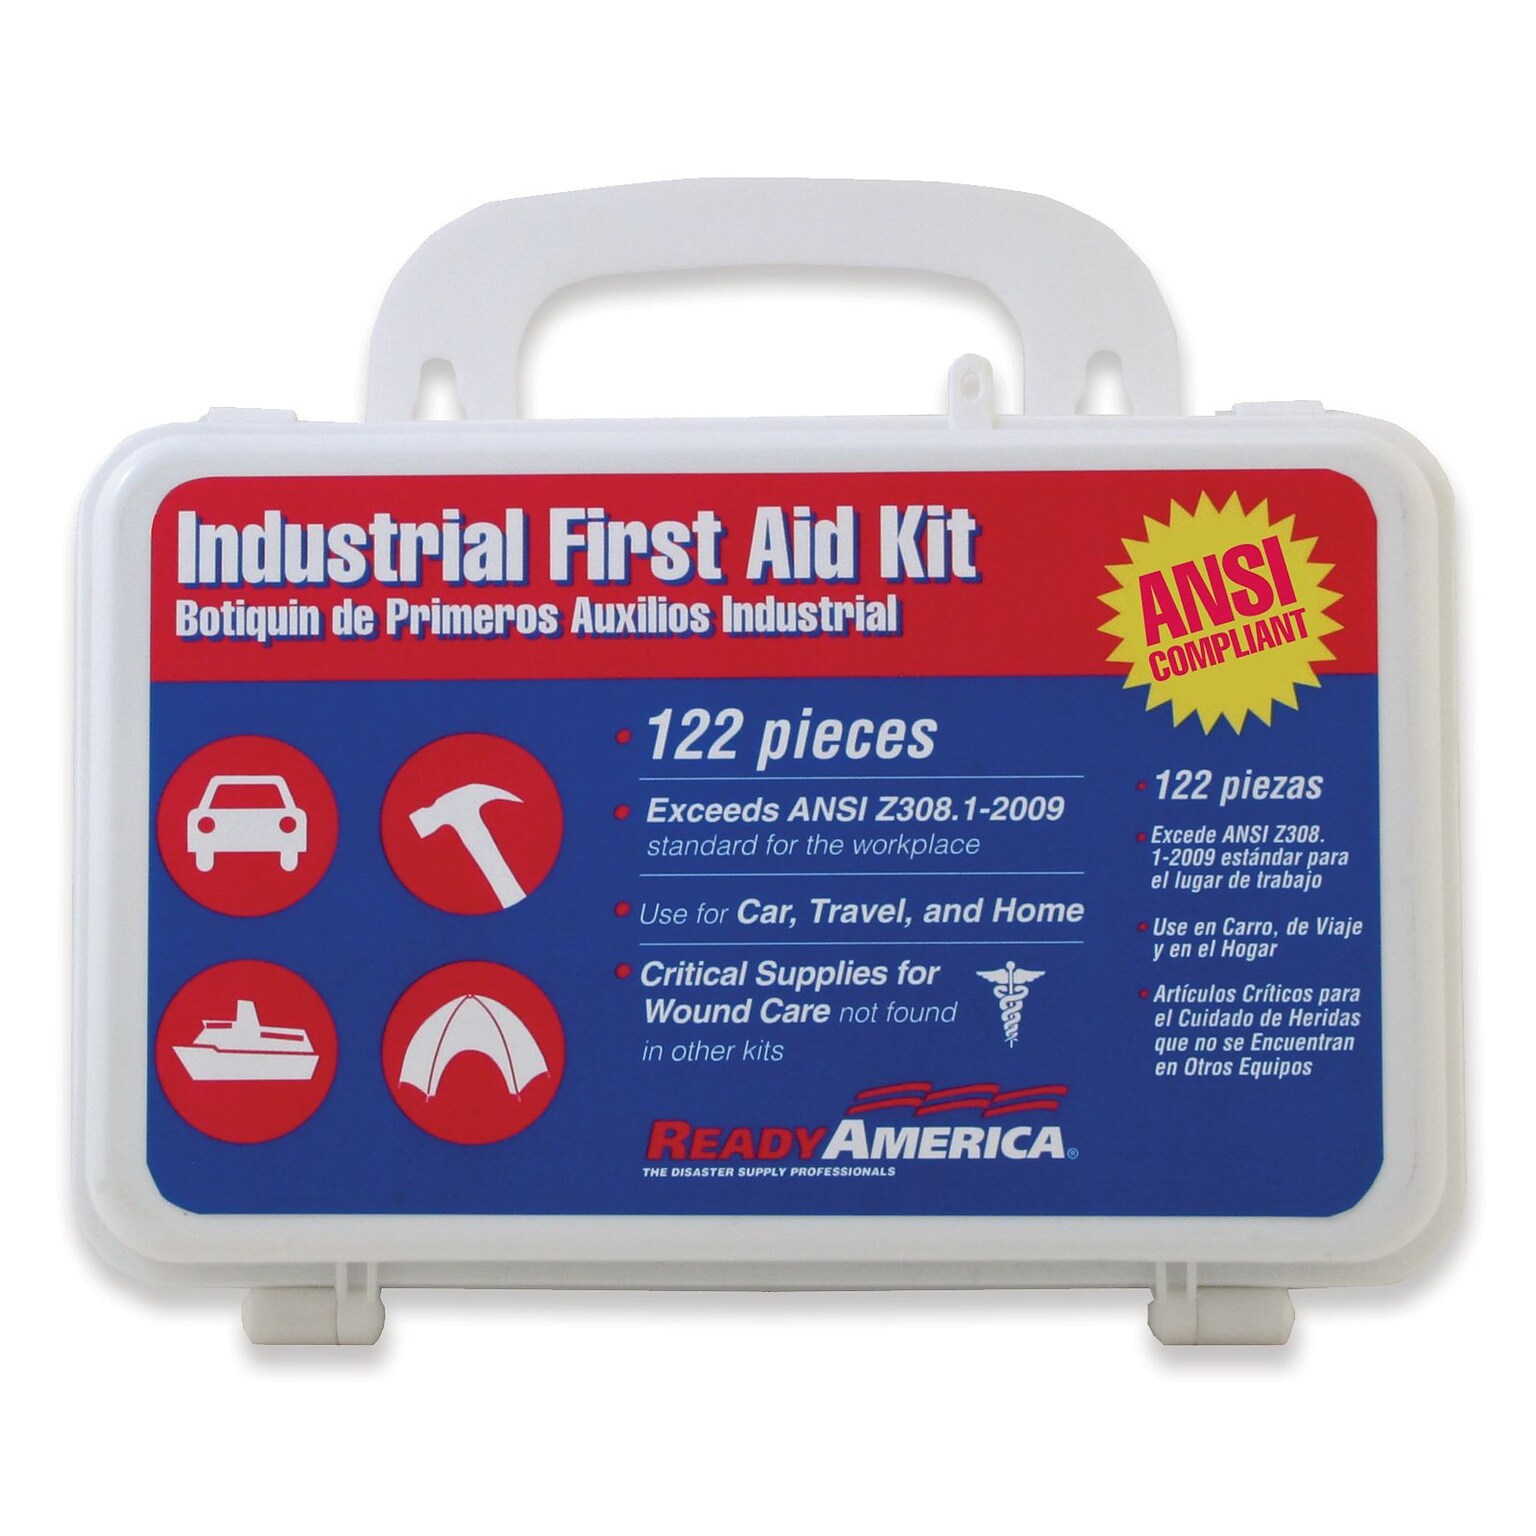 Ready America Industrial First Aid Kit,  122 Piece, 4/Pack (74016-4)